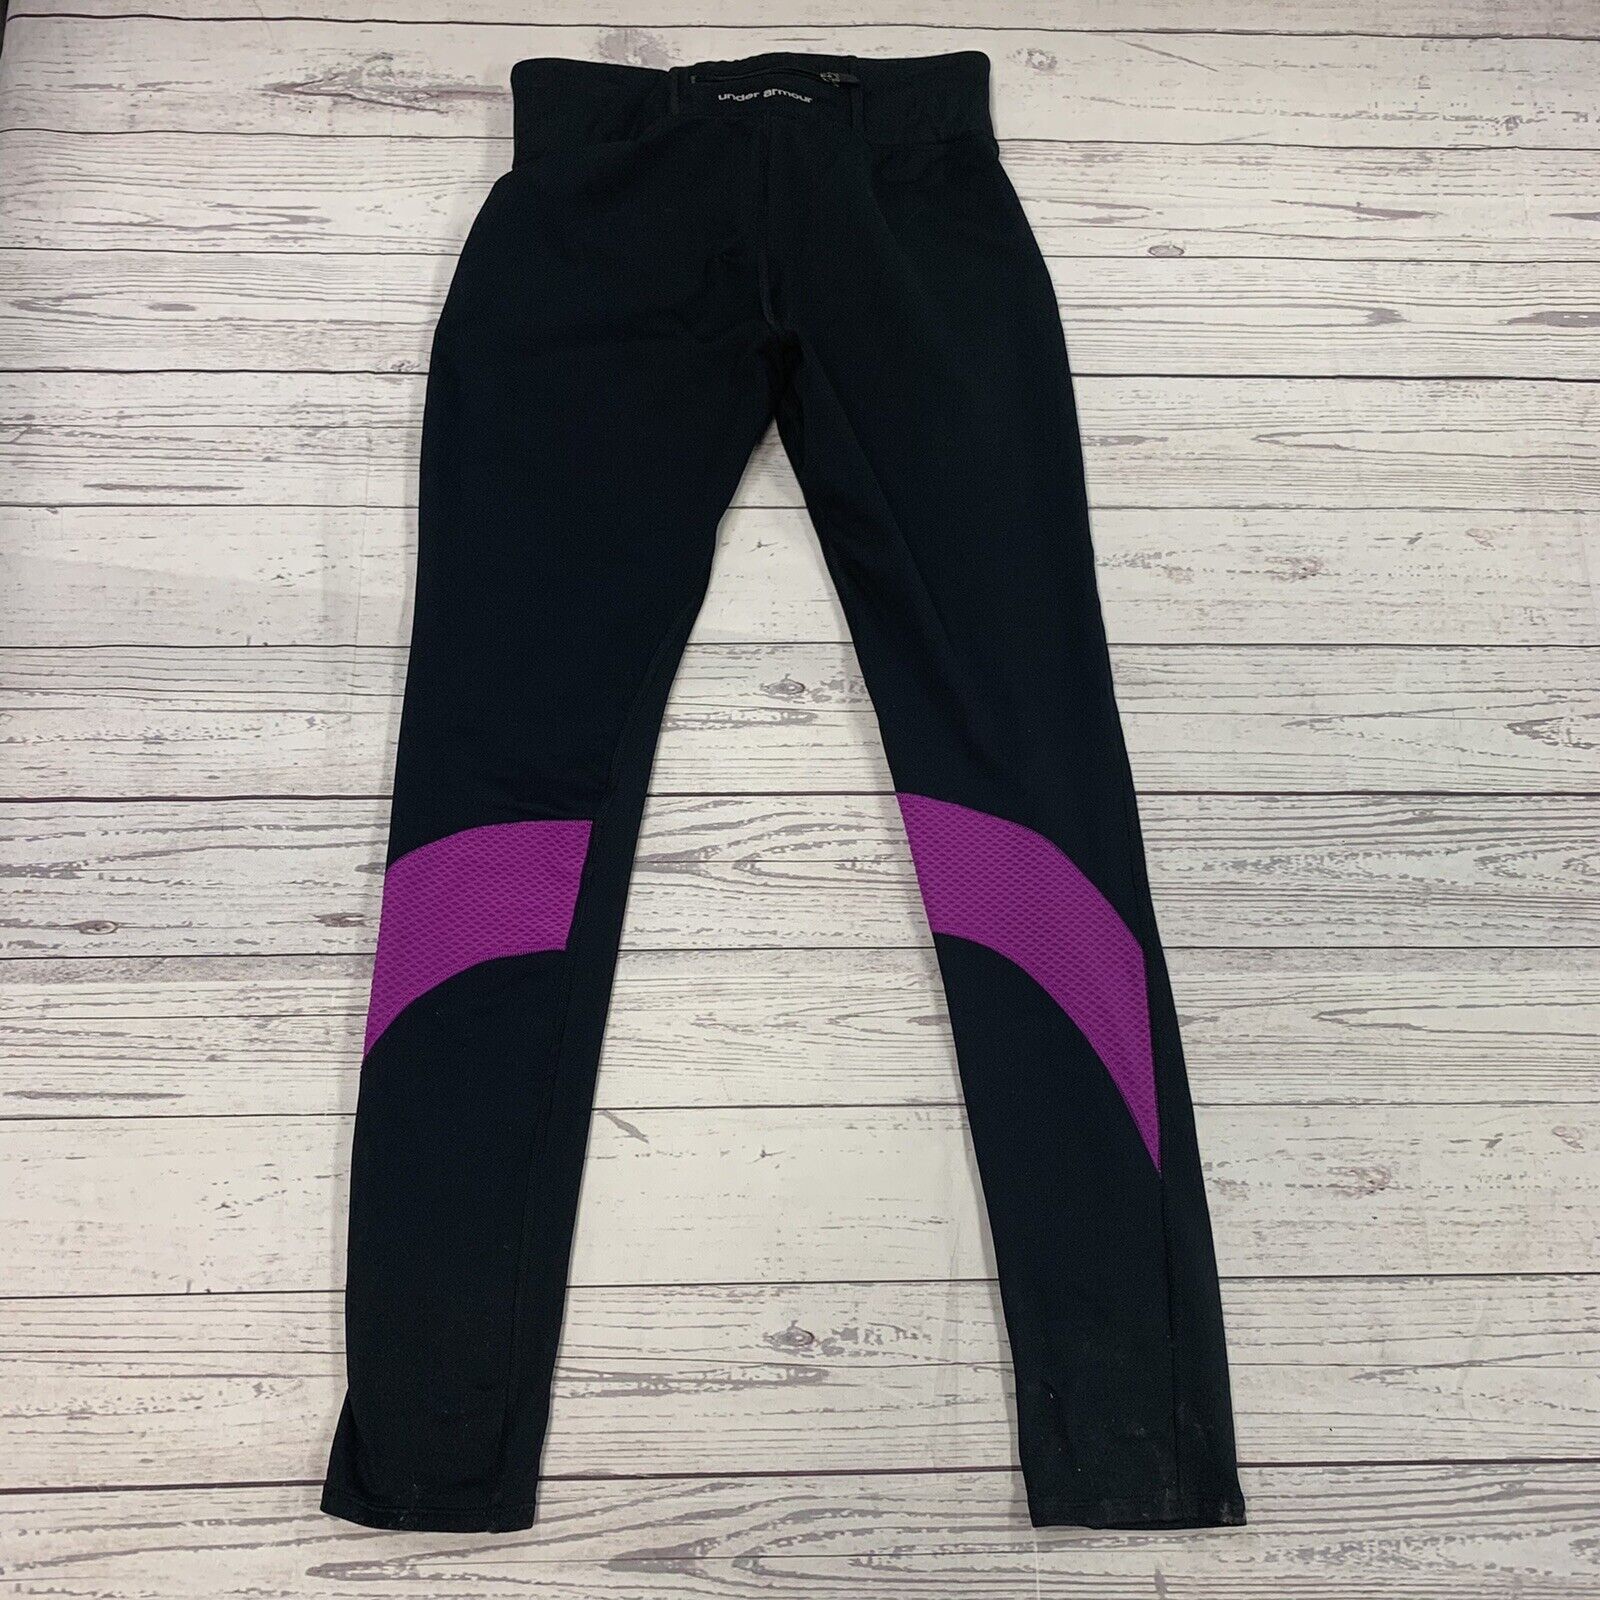 Under Armour Black leggings Womens Size Small - beyond exchange